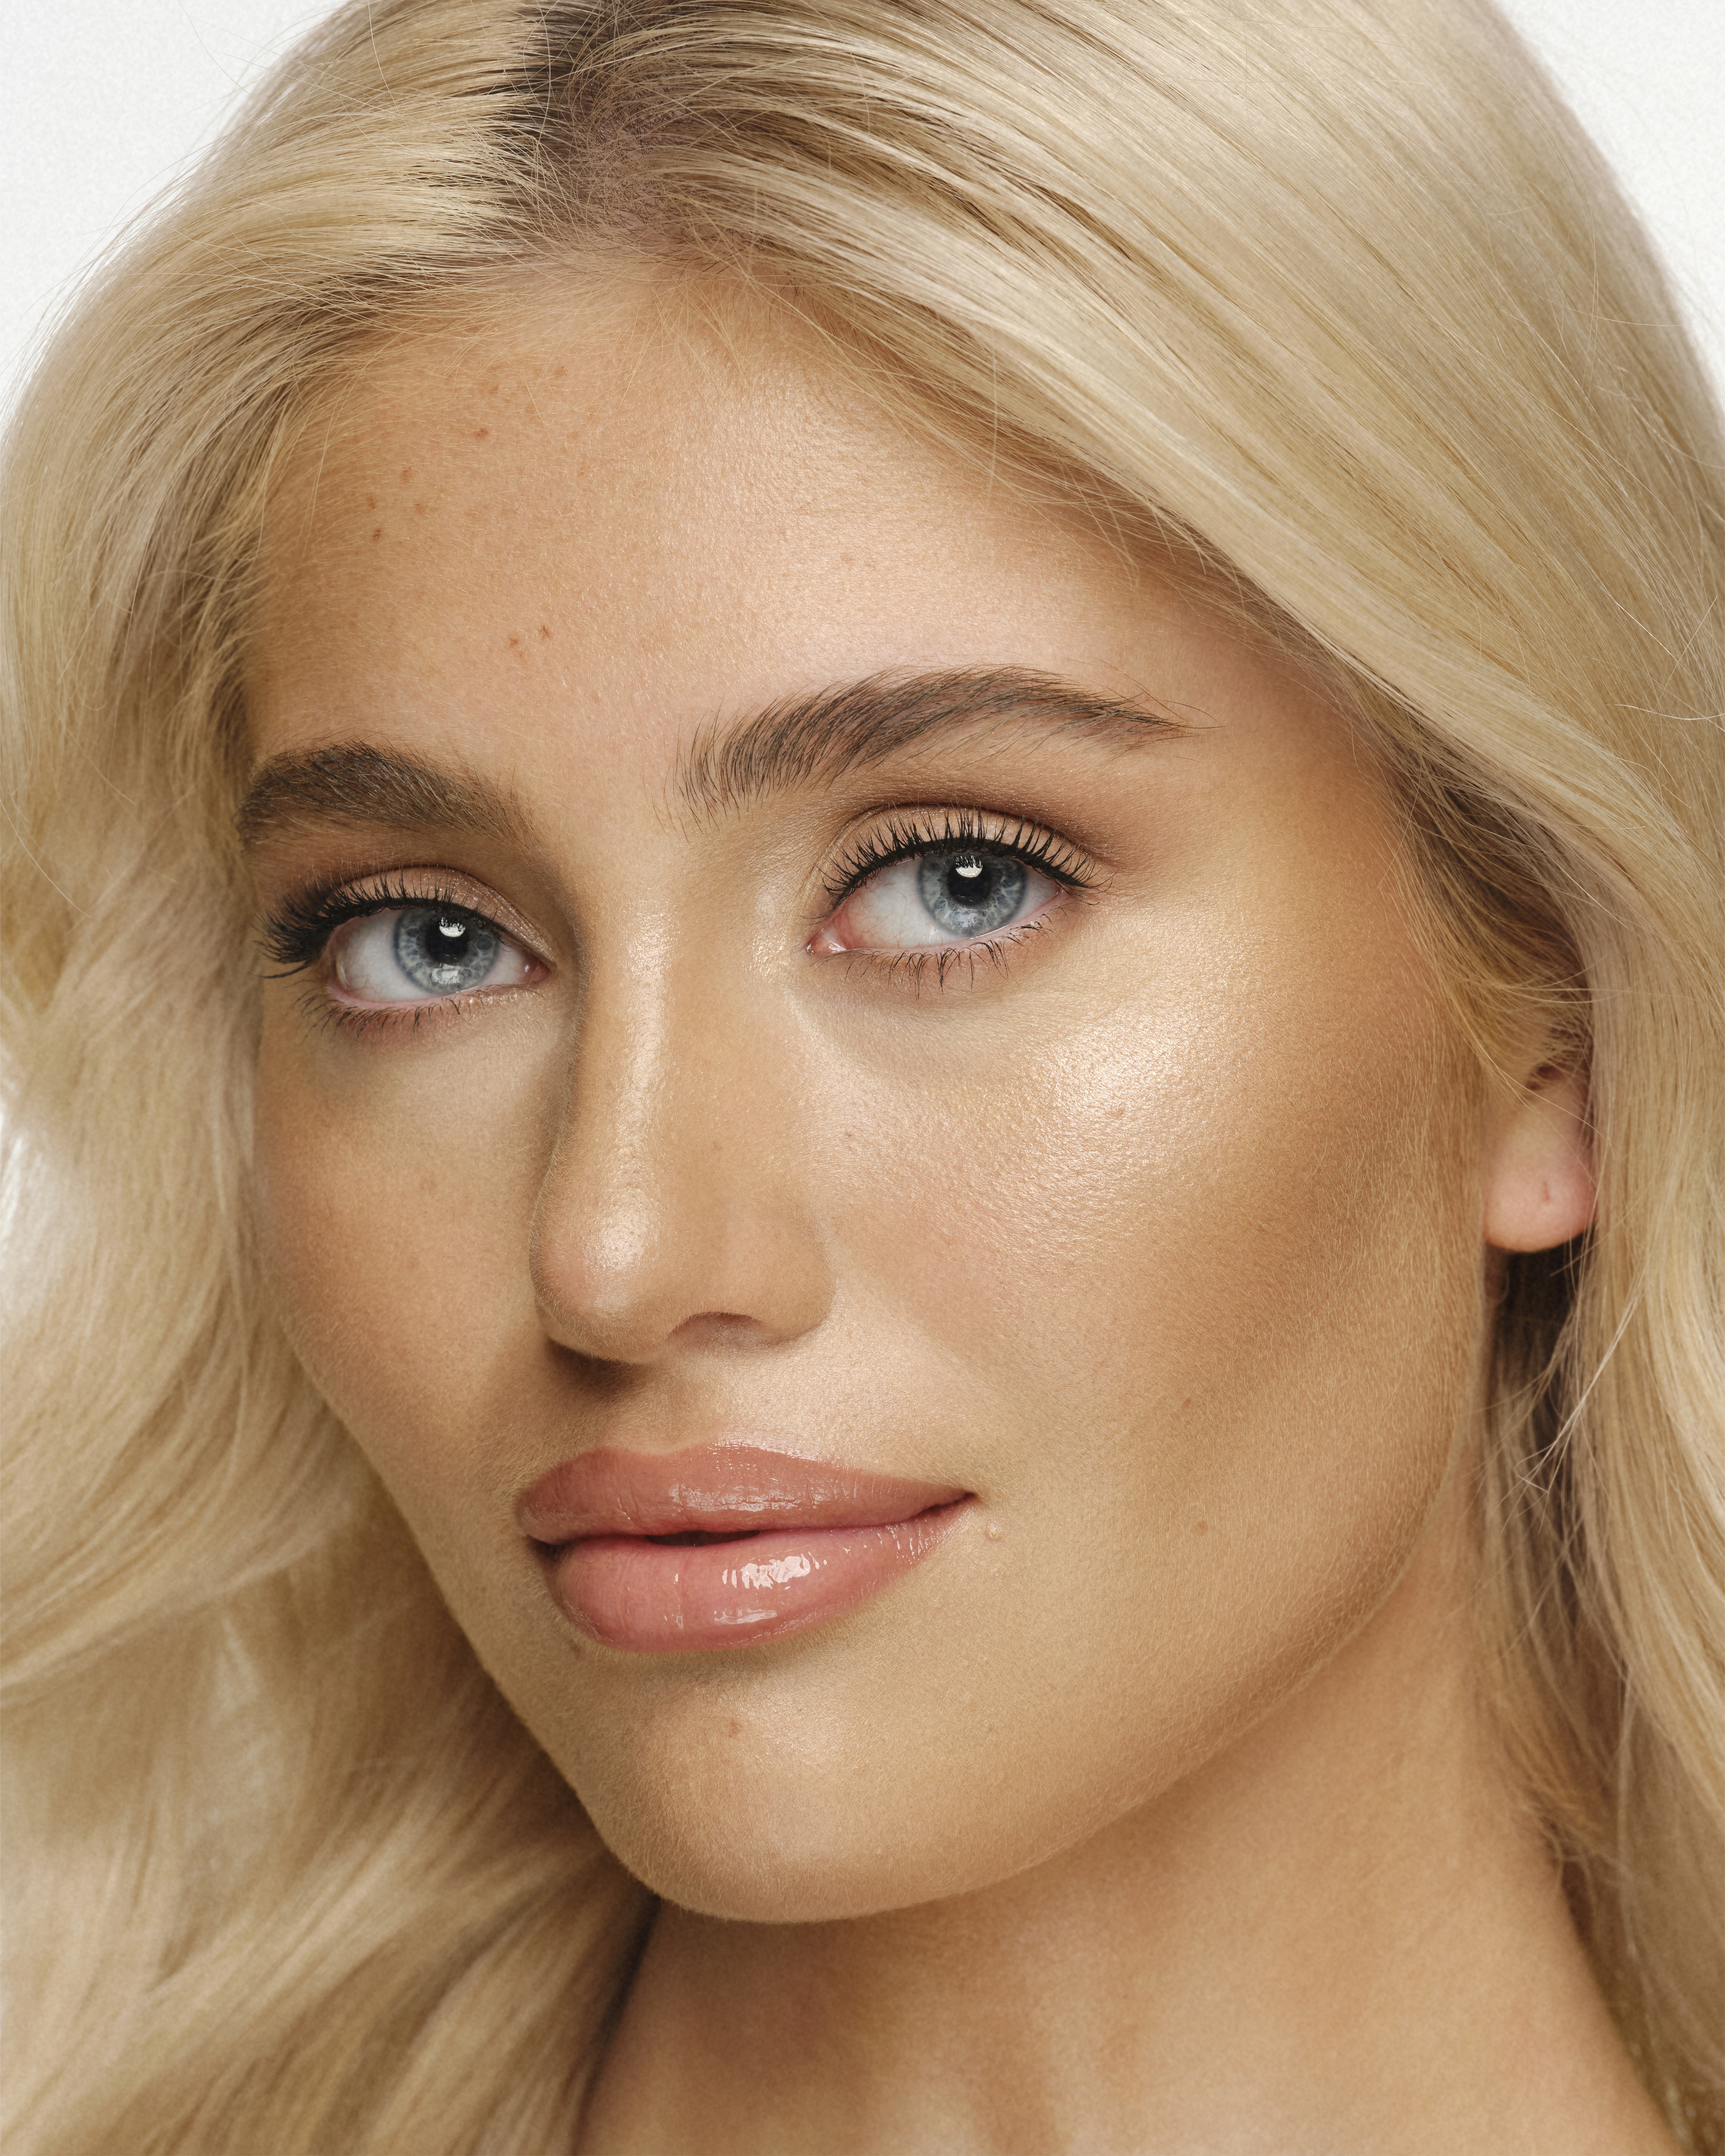 Model with a tantouring effect 4 days after applying Charlotte's Beautiful Skin Island Glow Easy Tanning Drops